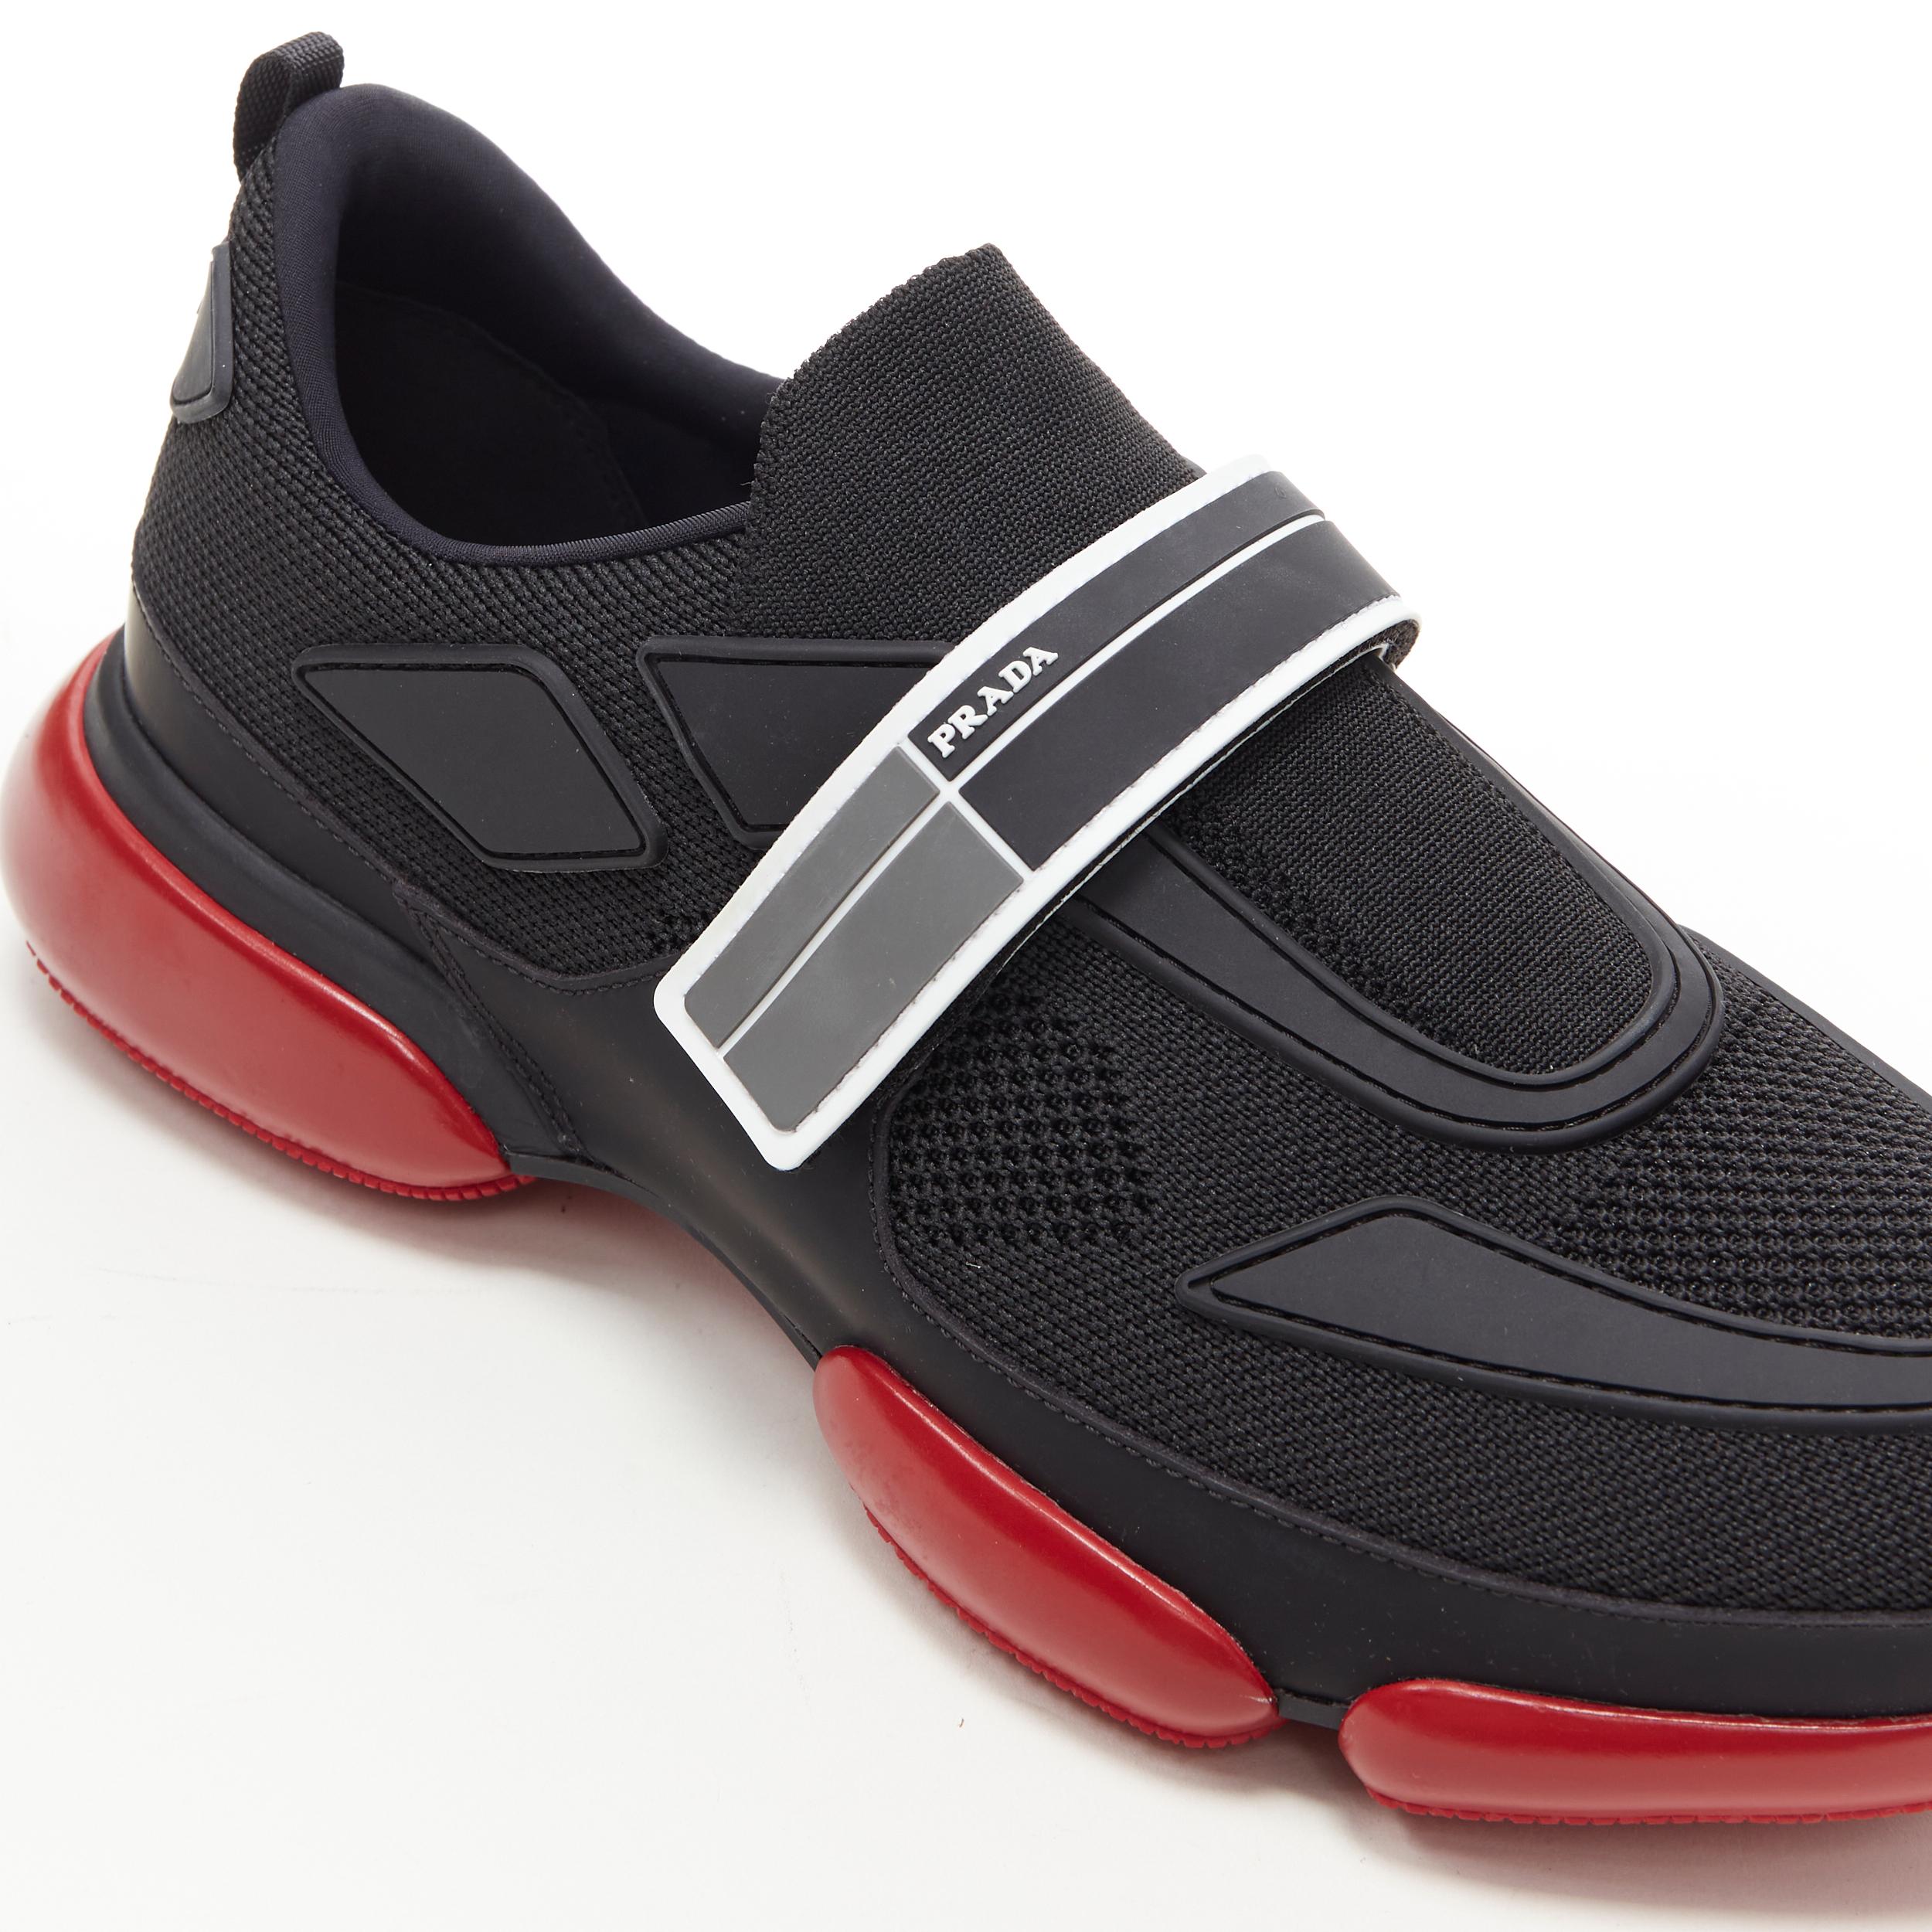 new PRADA Cloudbust black red logo rubber strapped low top sneakers UK7.5 US8.5 1